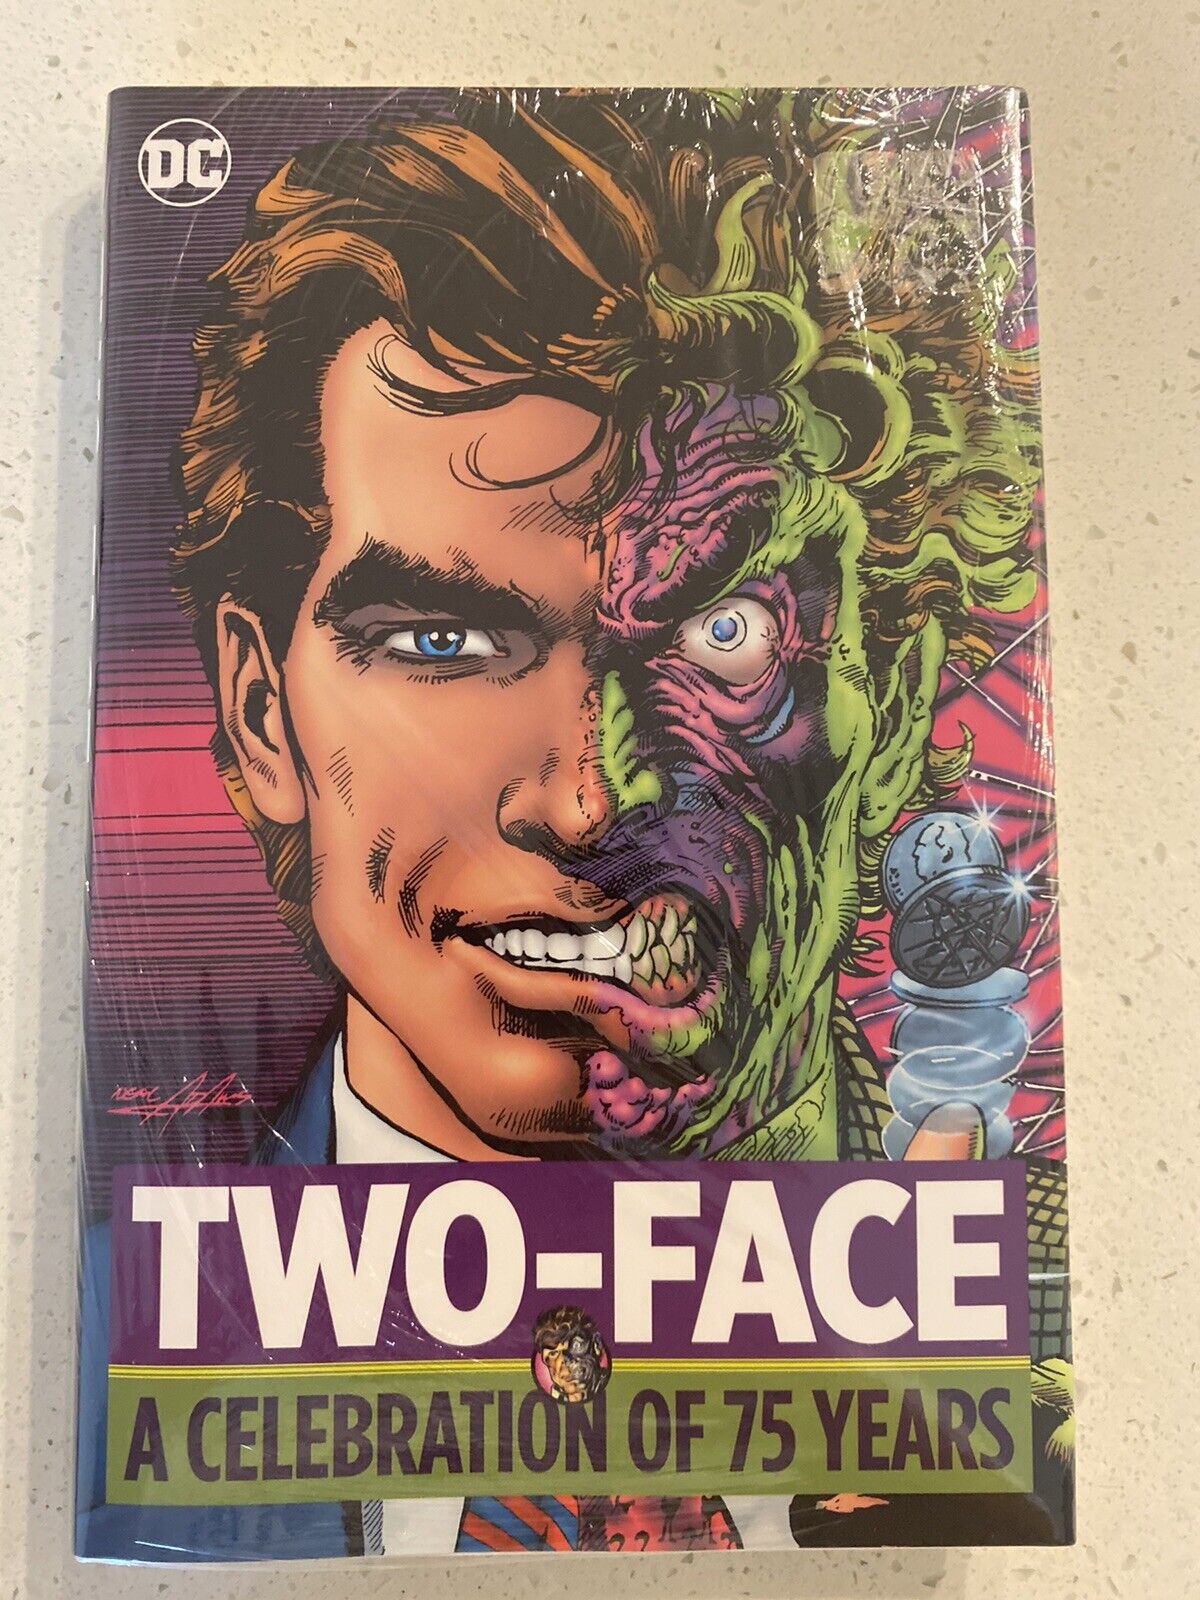 TWO FACE A CELEBRATION OF 75 YEARS Harcover in Shrink Wrap BATMAN DC